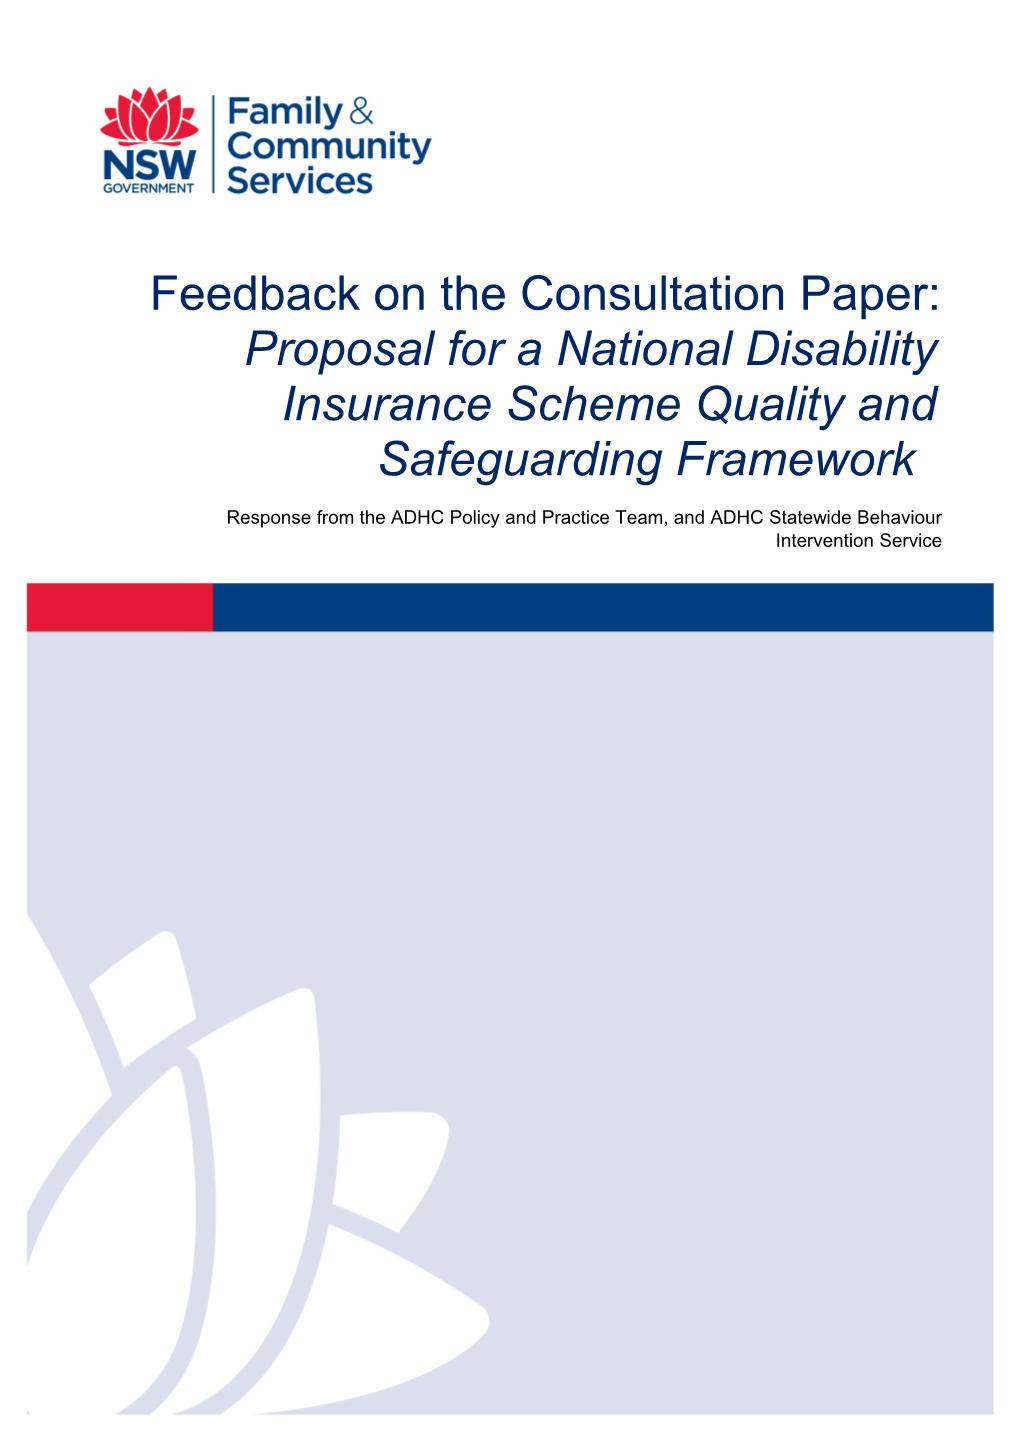 Feedback on the Consultation Paper: Proposal for a National Disability Insurance Scheme